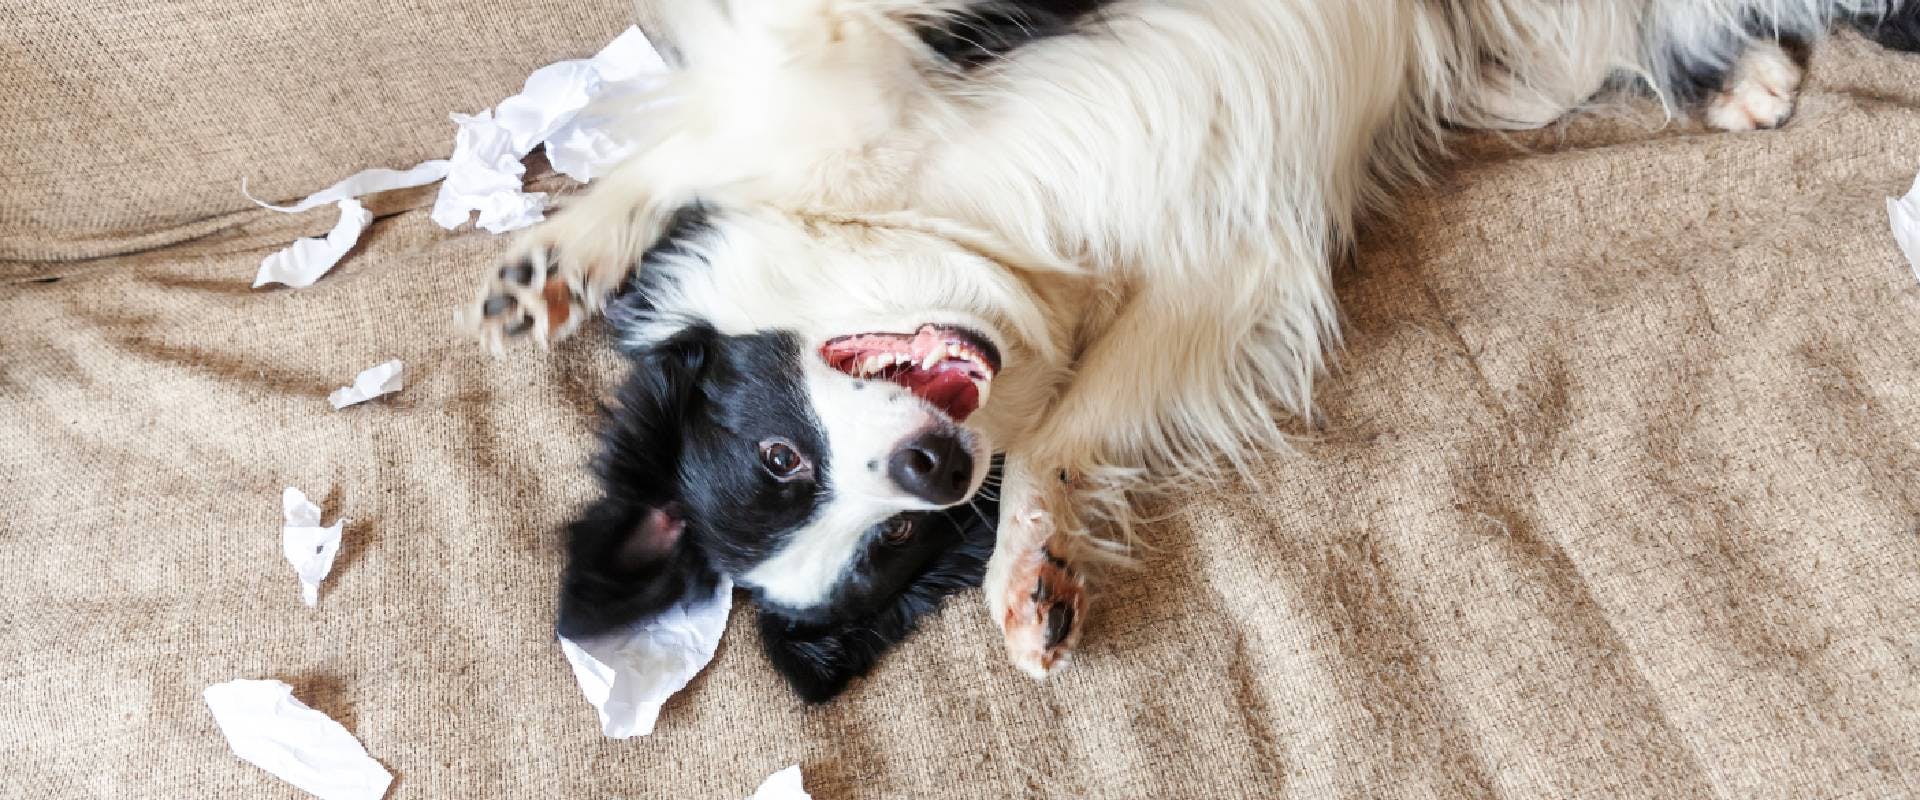 Puppy Dog Border Collie After Mischief Biting Toilet Paper Lying On Couch At Home